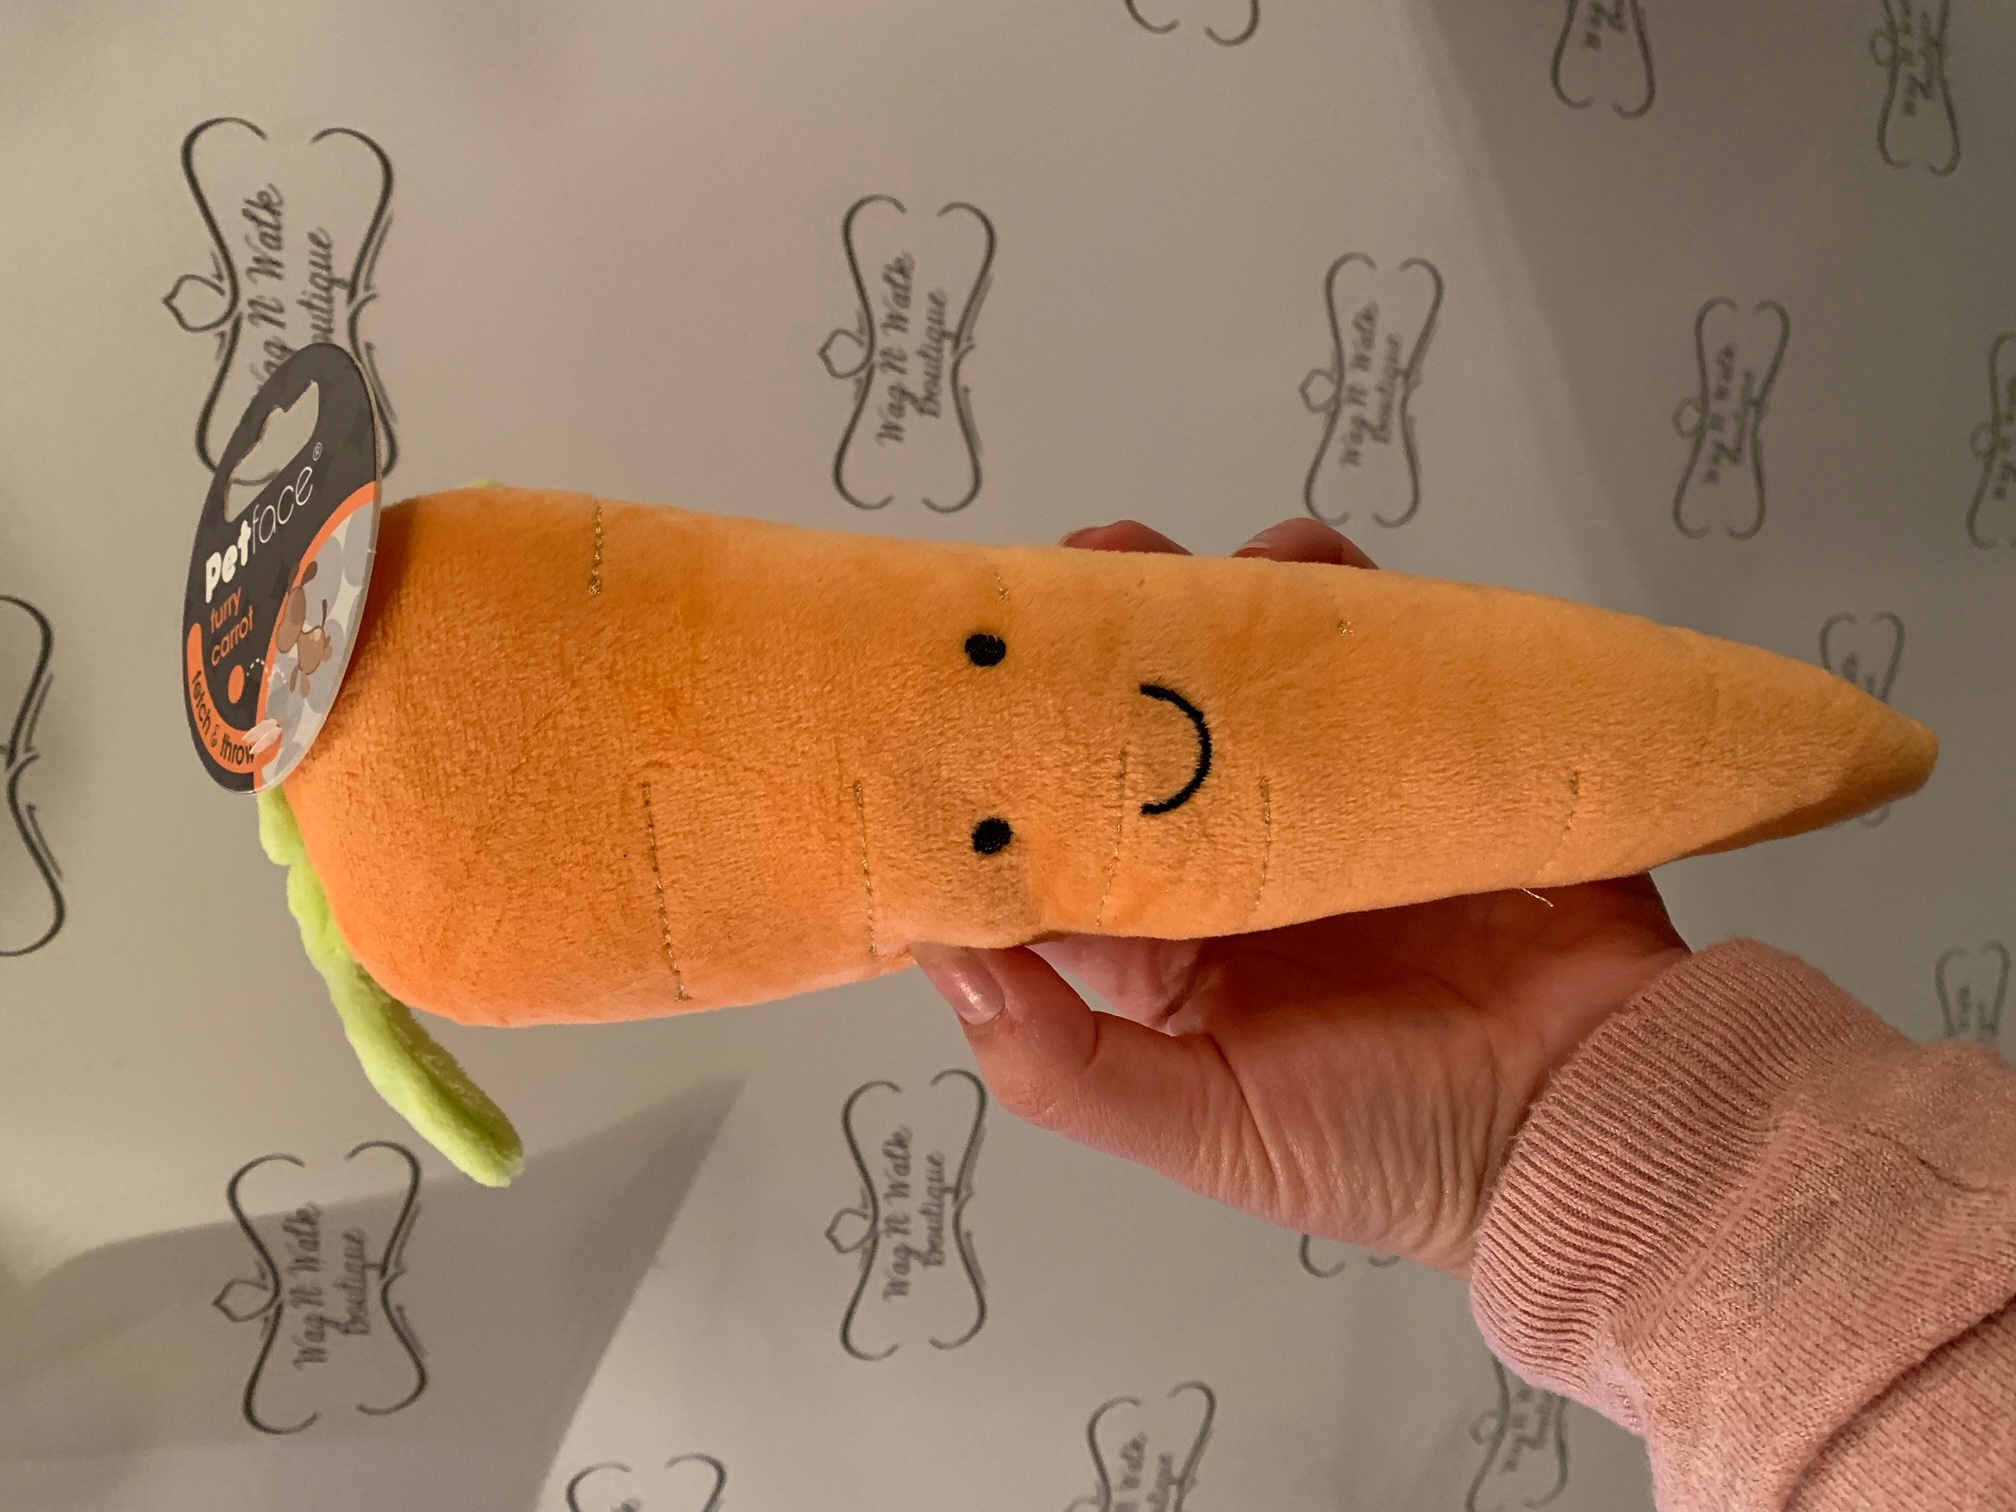 Kevin-the-Fluffy-Carrot